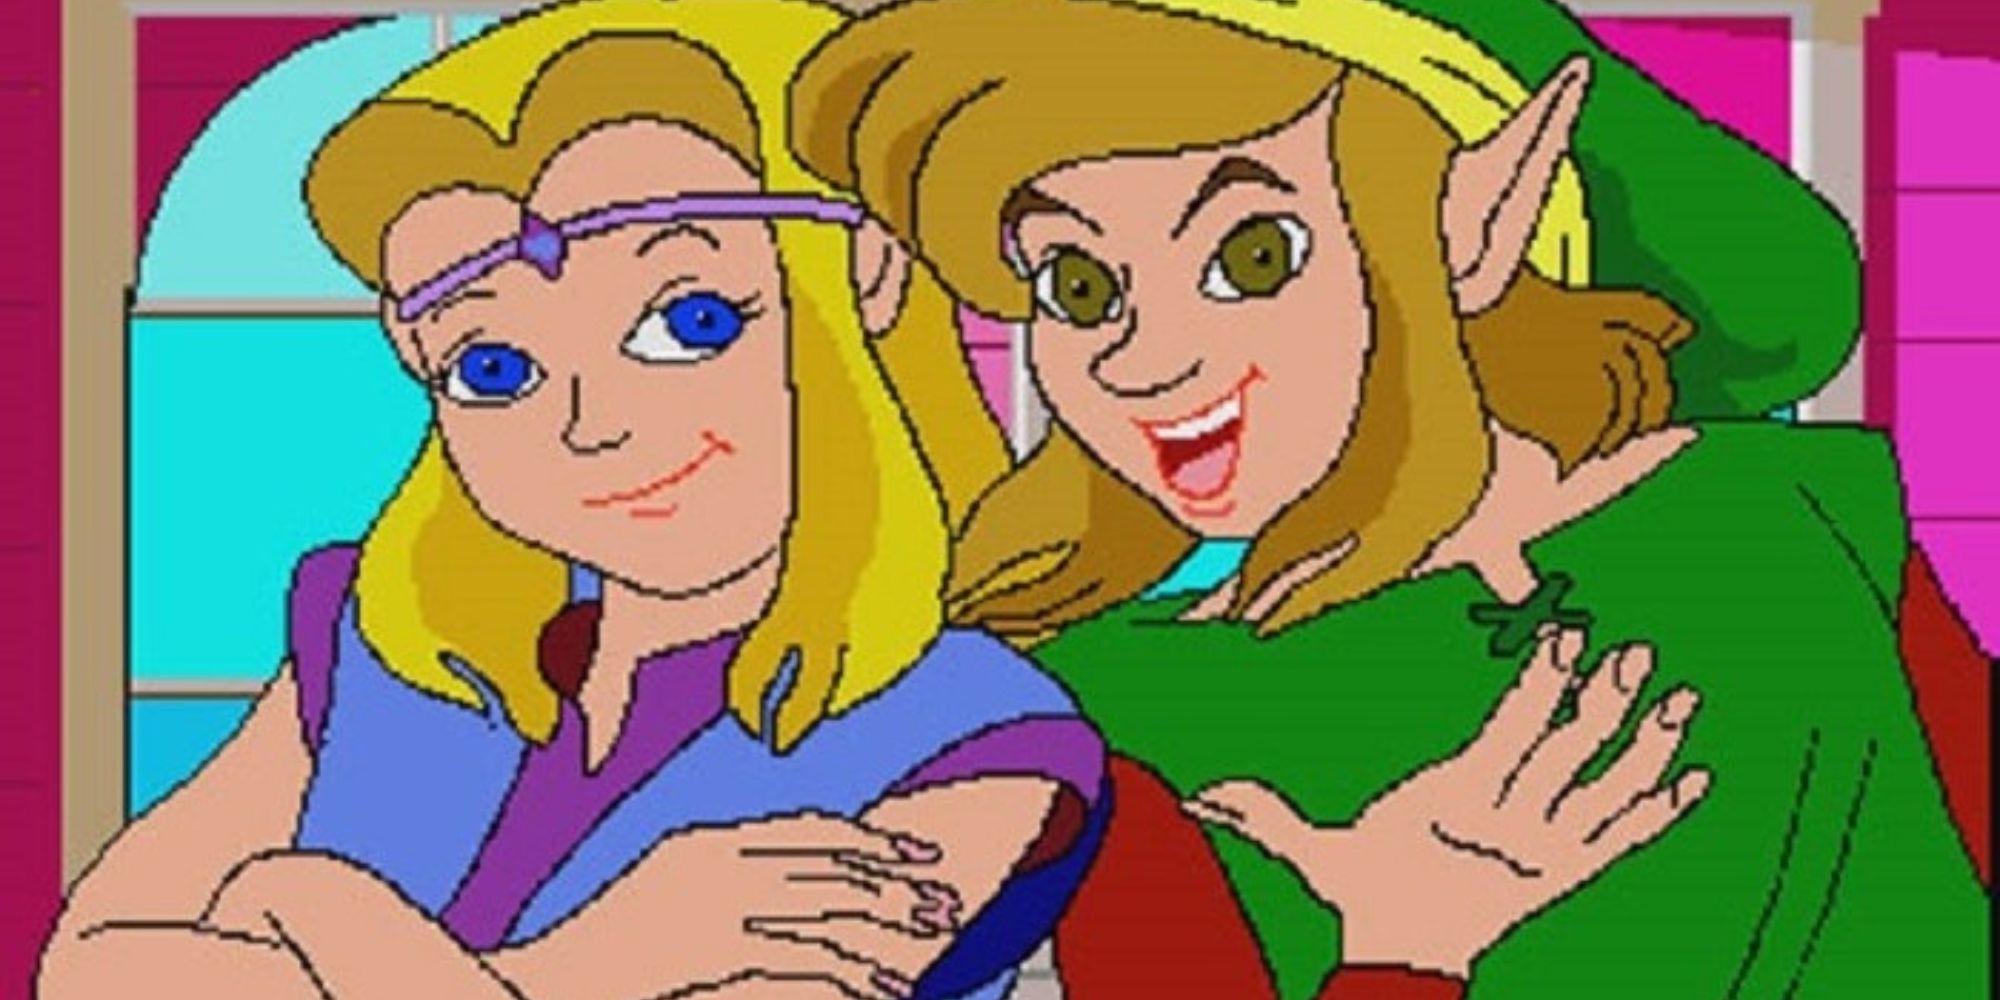 Link and Zelda stand beside each other